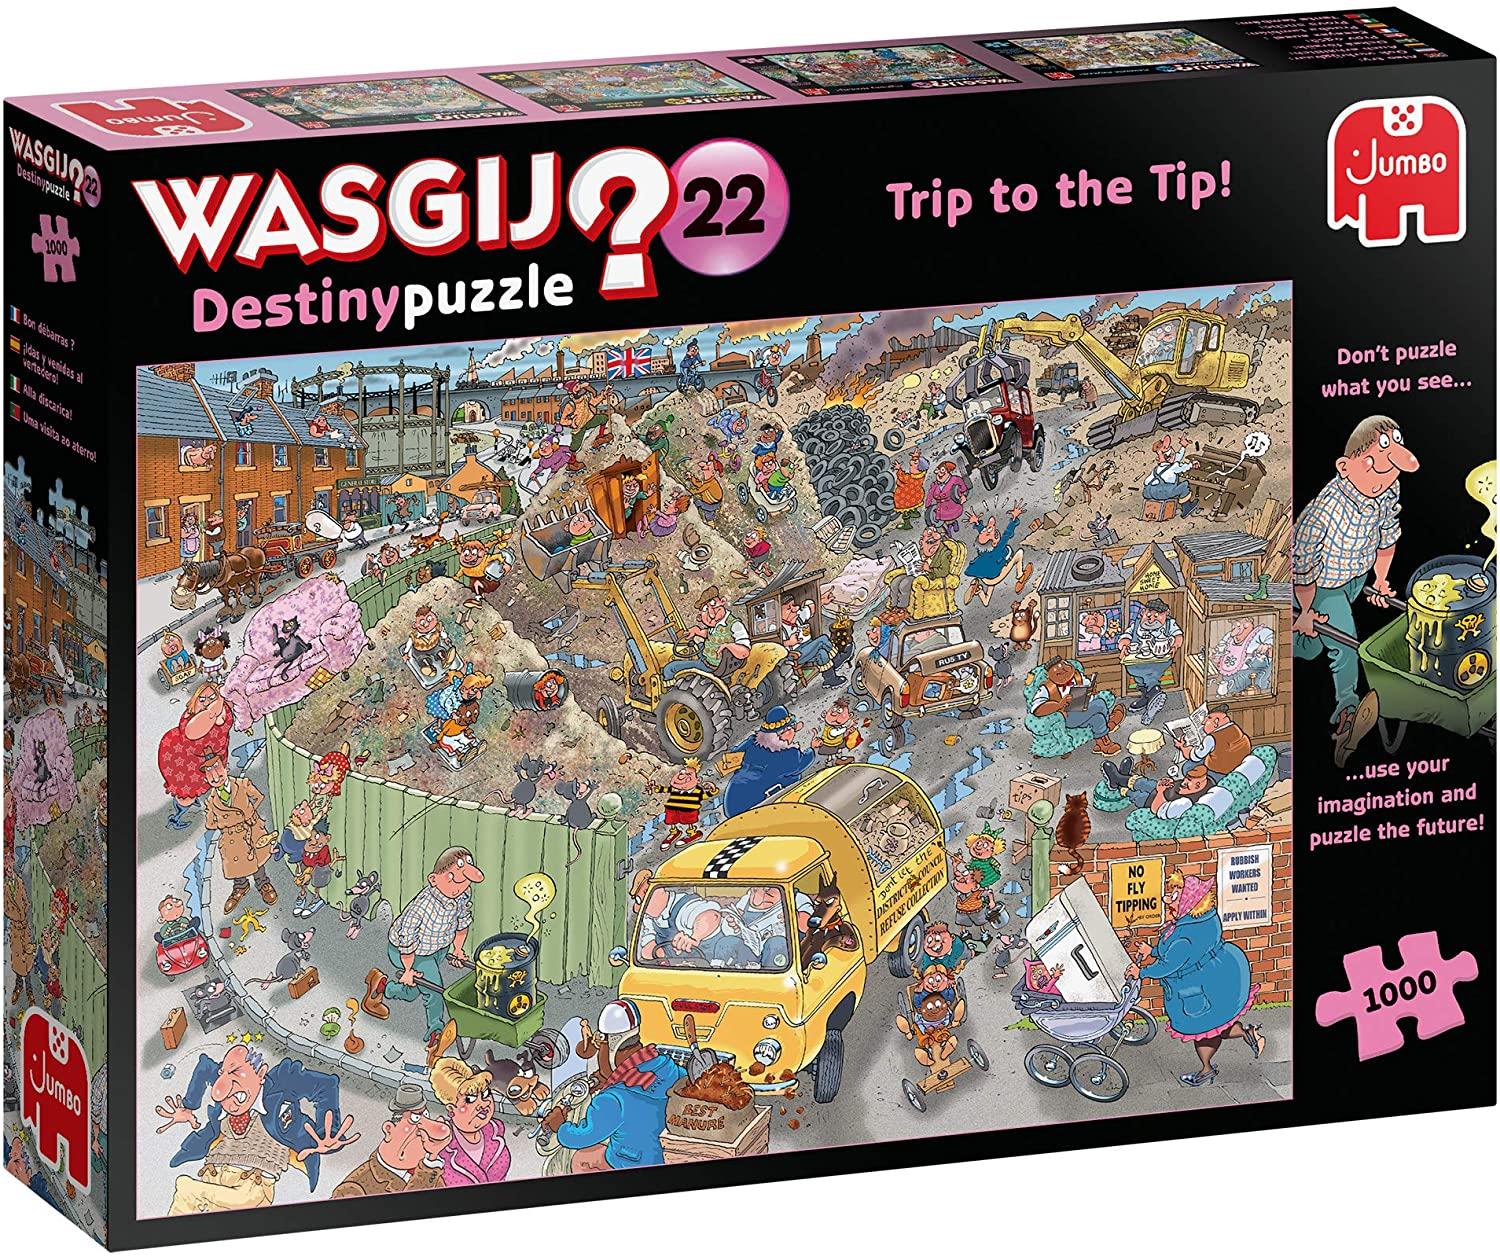 Wasgij Destiny 22 A Trip to the Tip! Jigsaw Puzzle (1000 pieces)